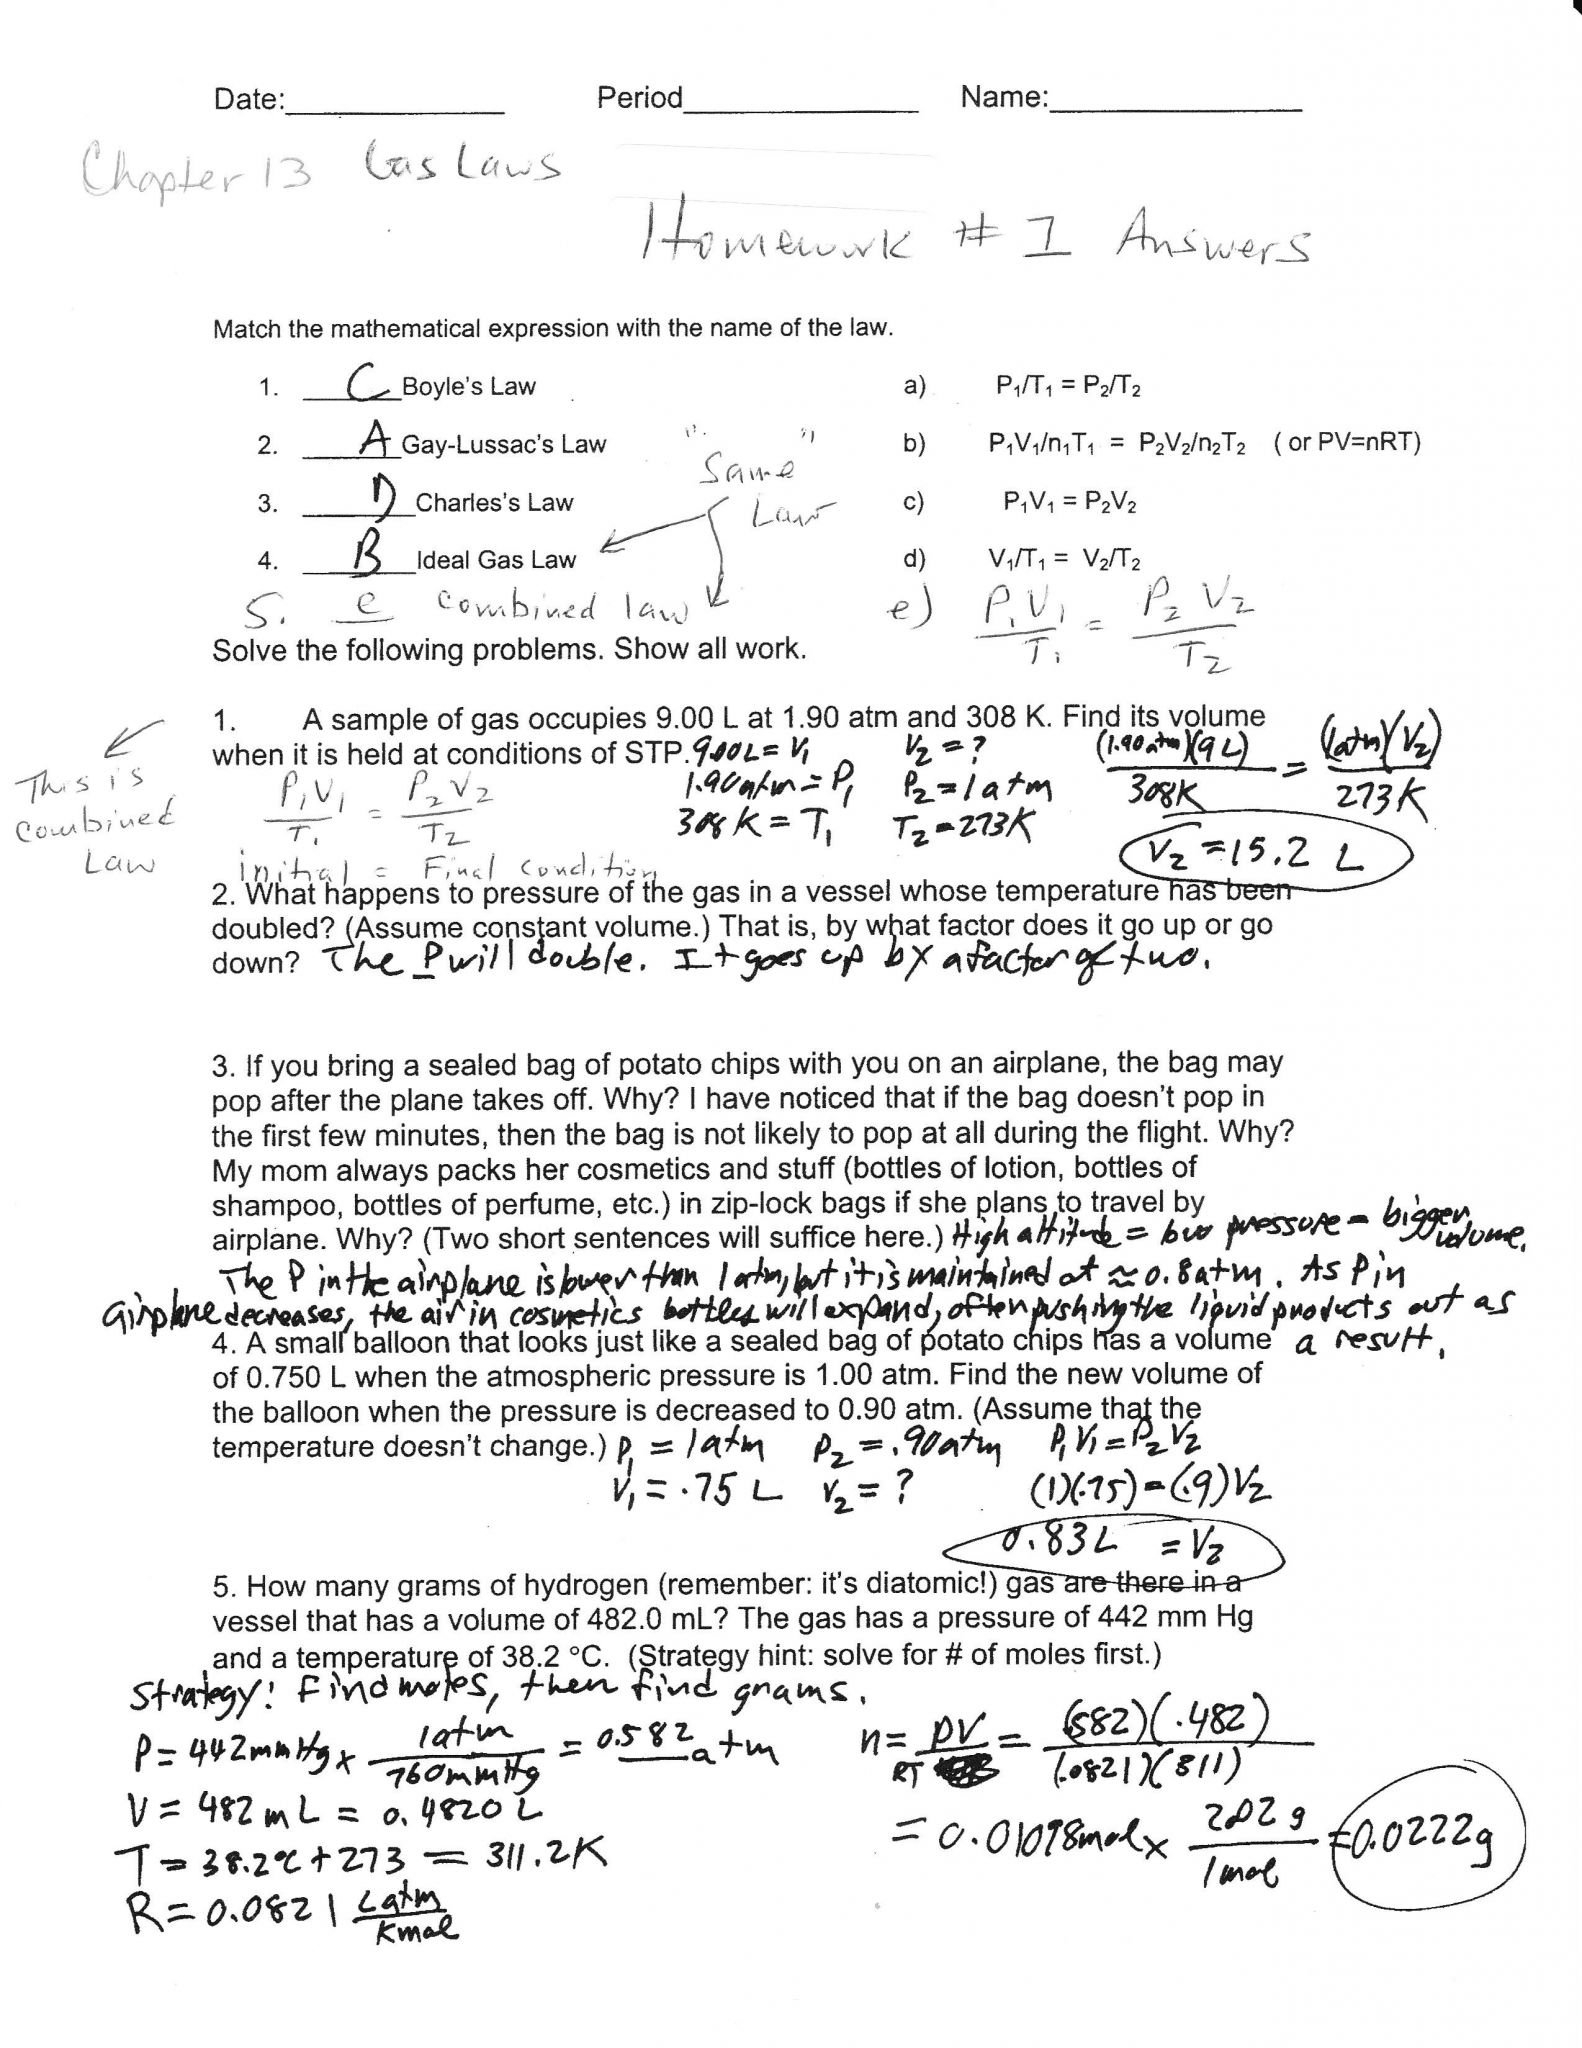 Chemistry Temperature Conversion Worksheet With Answers In Chemistry Temperature Conversion Worksheet With Answers